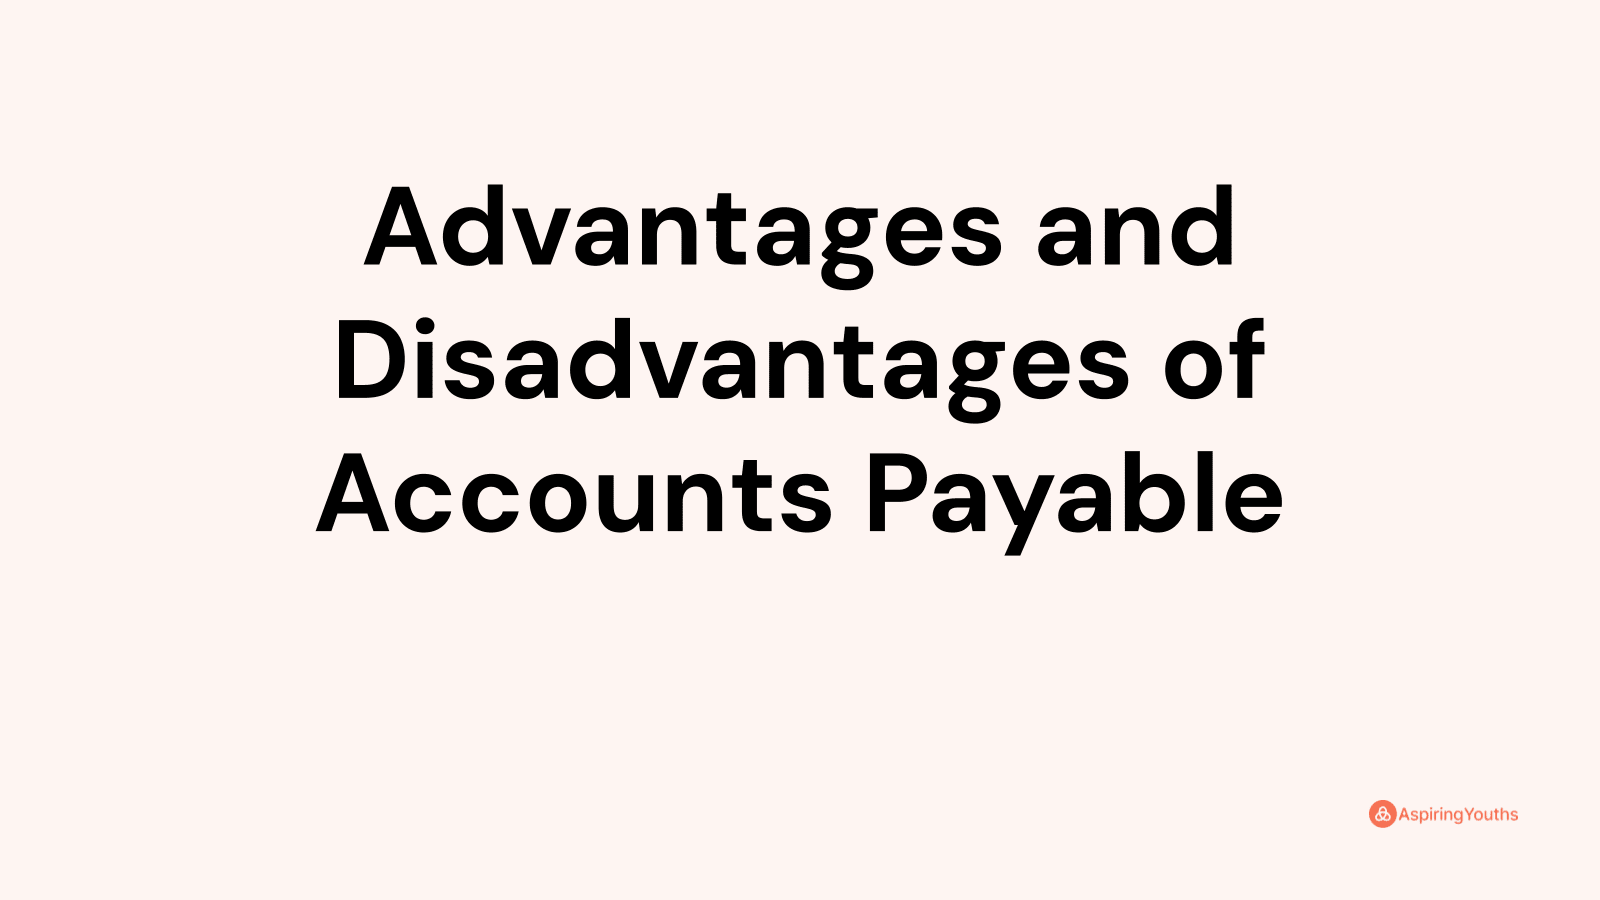 Advantages and disadvantages of Accounts Payable